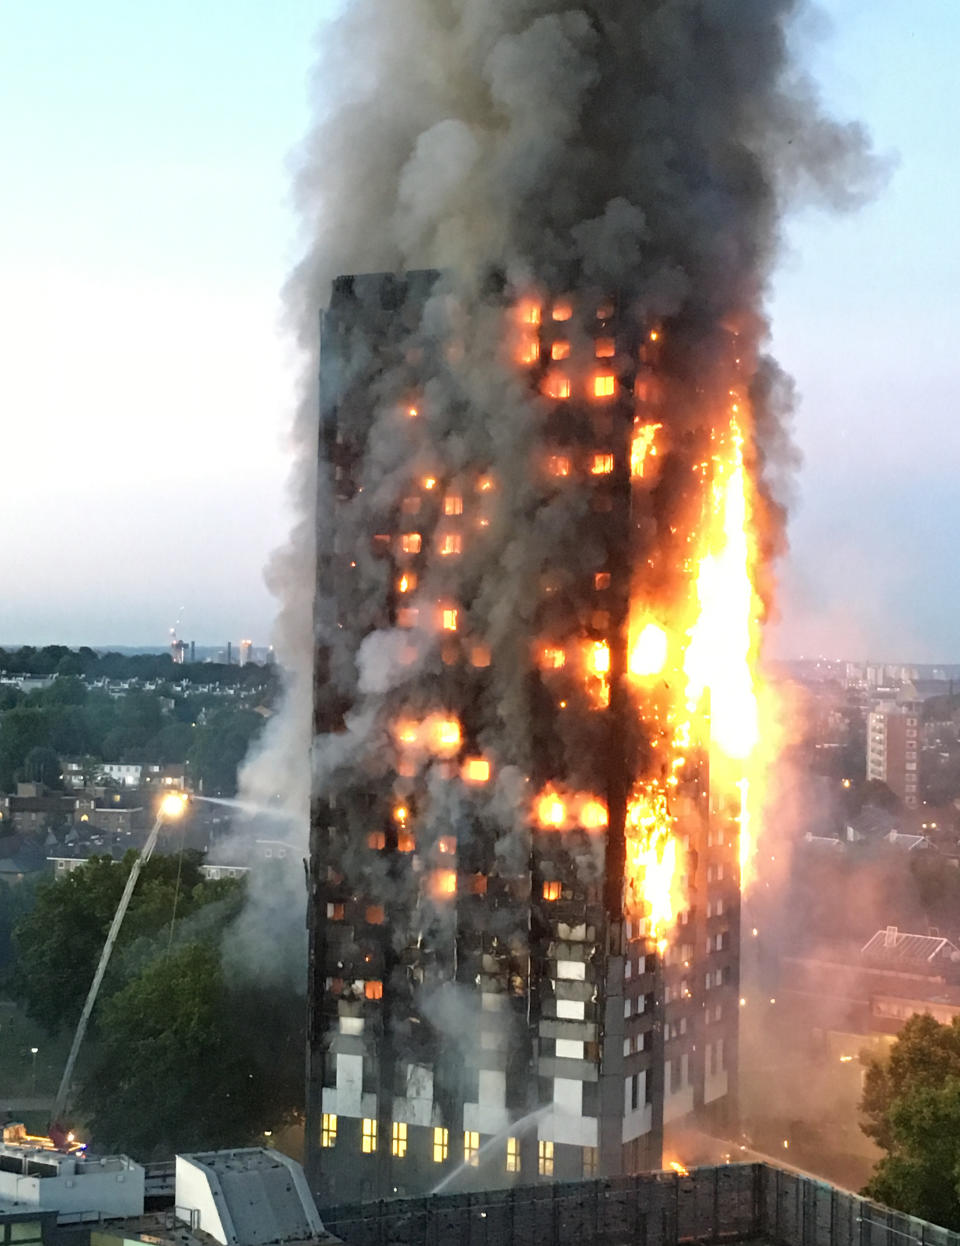 <p>In one of the most distressing photos of the year, thick smoke rises into the cloudless sky as over 200 firefighters from across London continue tackle the blaze at Grenfell Tower in North Kensington. Fire crews were called to the high-rise residential block on the Lancaster West housing estate in White City just before 1am on 14 June. The devastating fire killed 71 people. (REX/Shutterstock) </p>